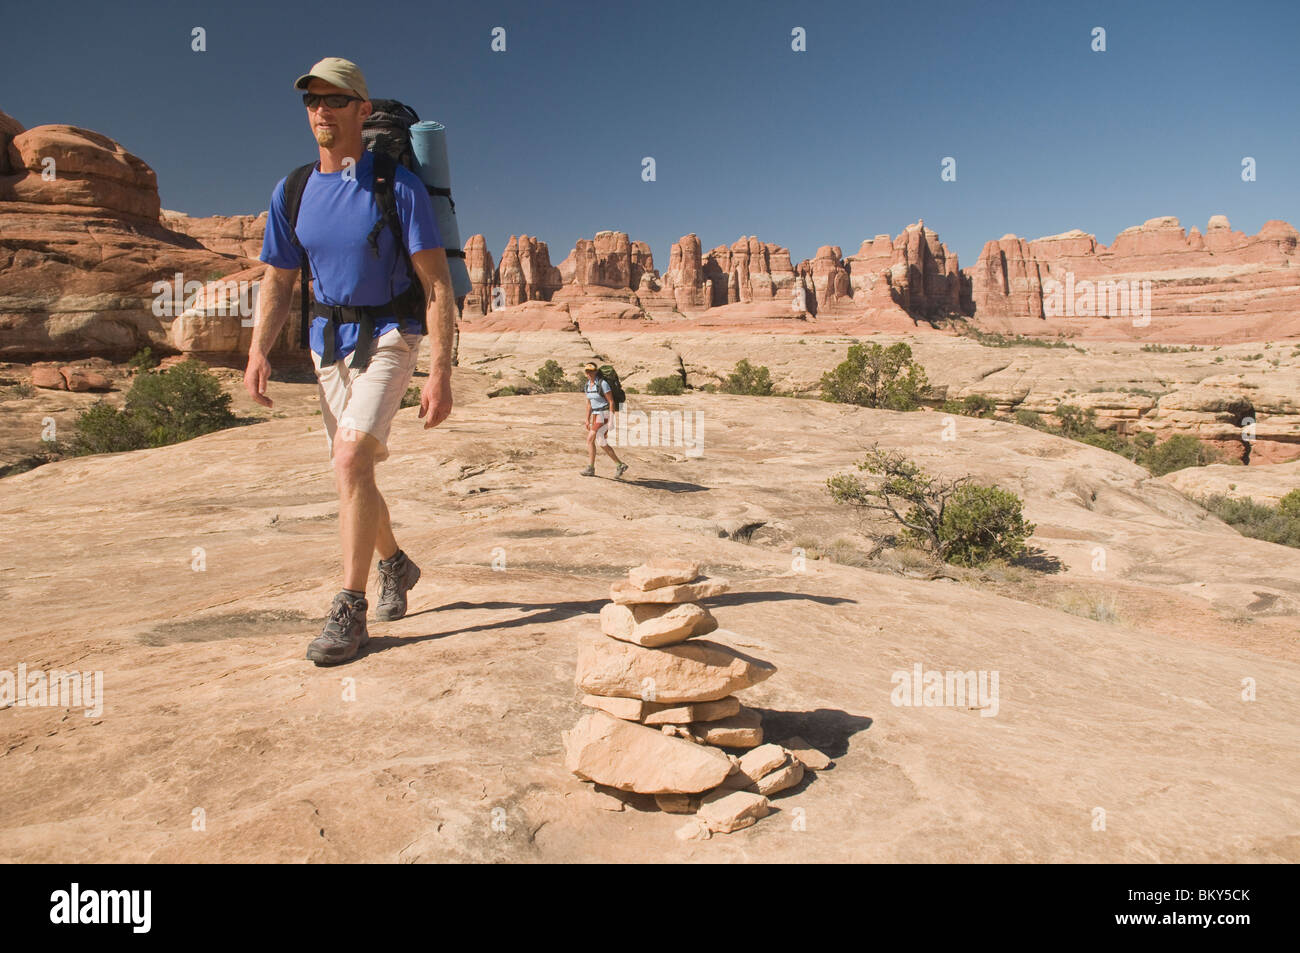 http://c8.alamy.com/comp/BKY5CK/man-and-woman-hiking-along-a-sandstone-trail-marked-with-cairns-canyonlands-BKY5CK.jpg